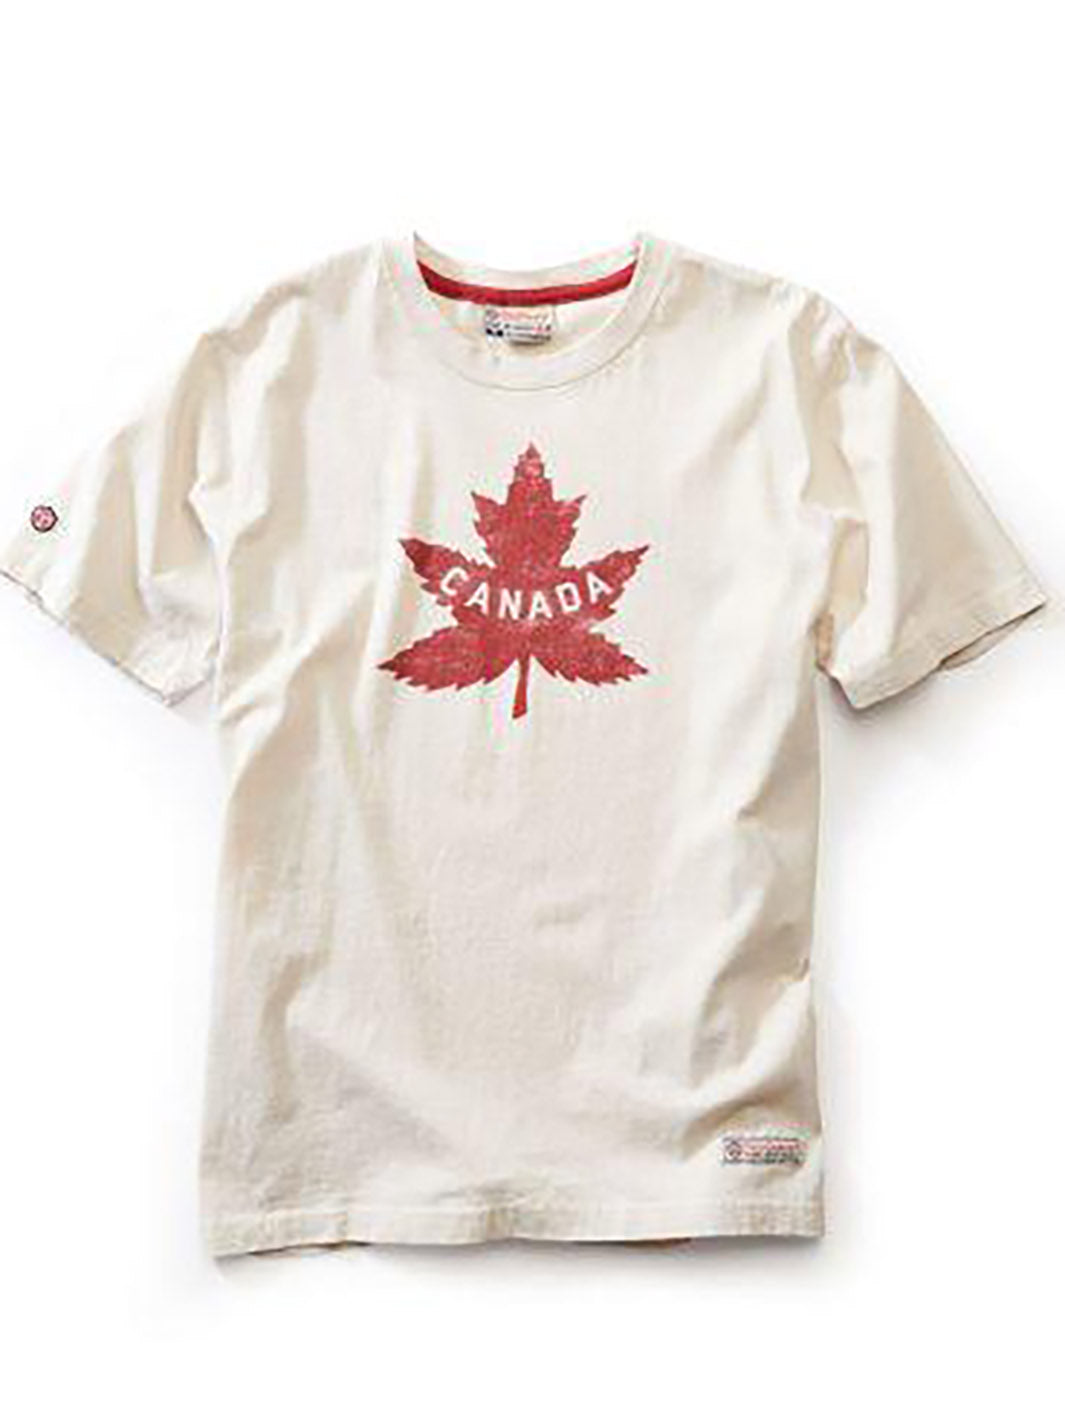 Tshirt heritage canadiens stone pour homme